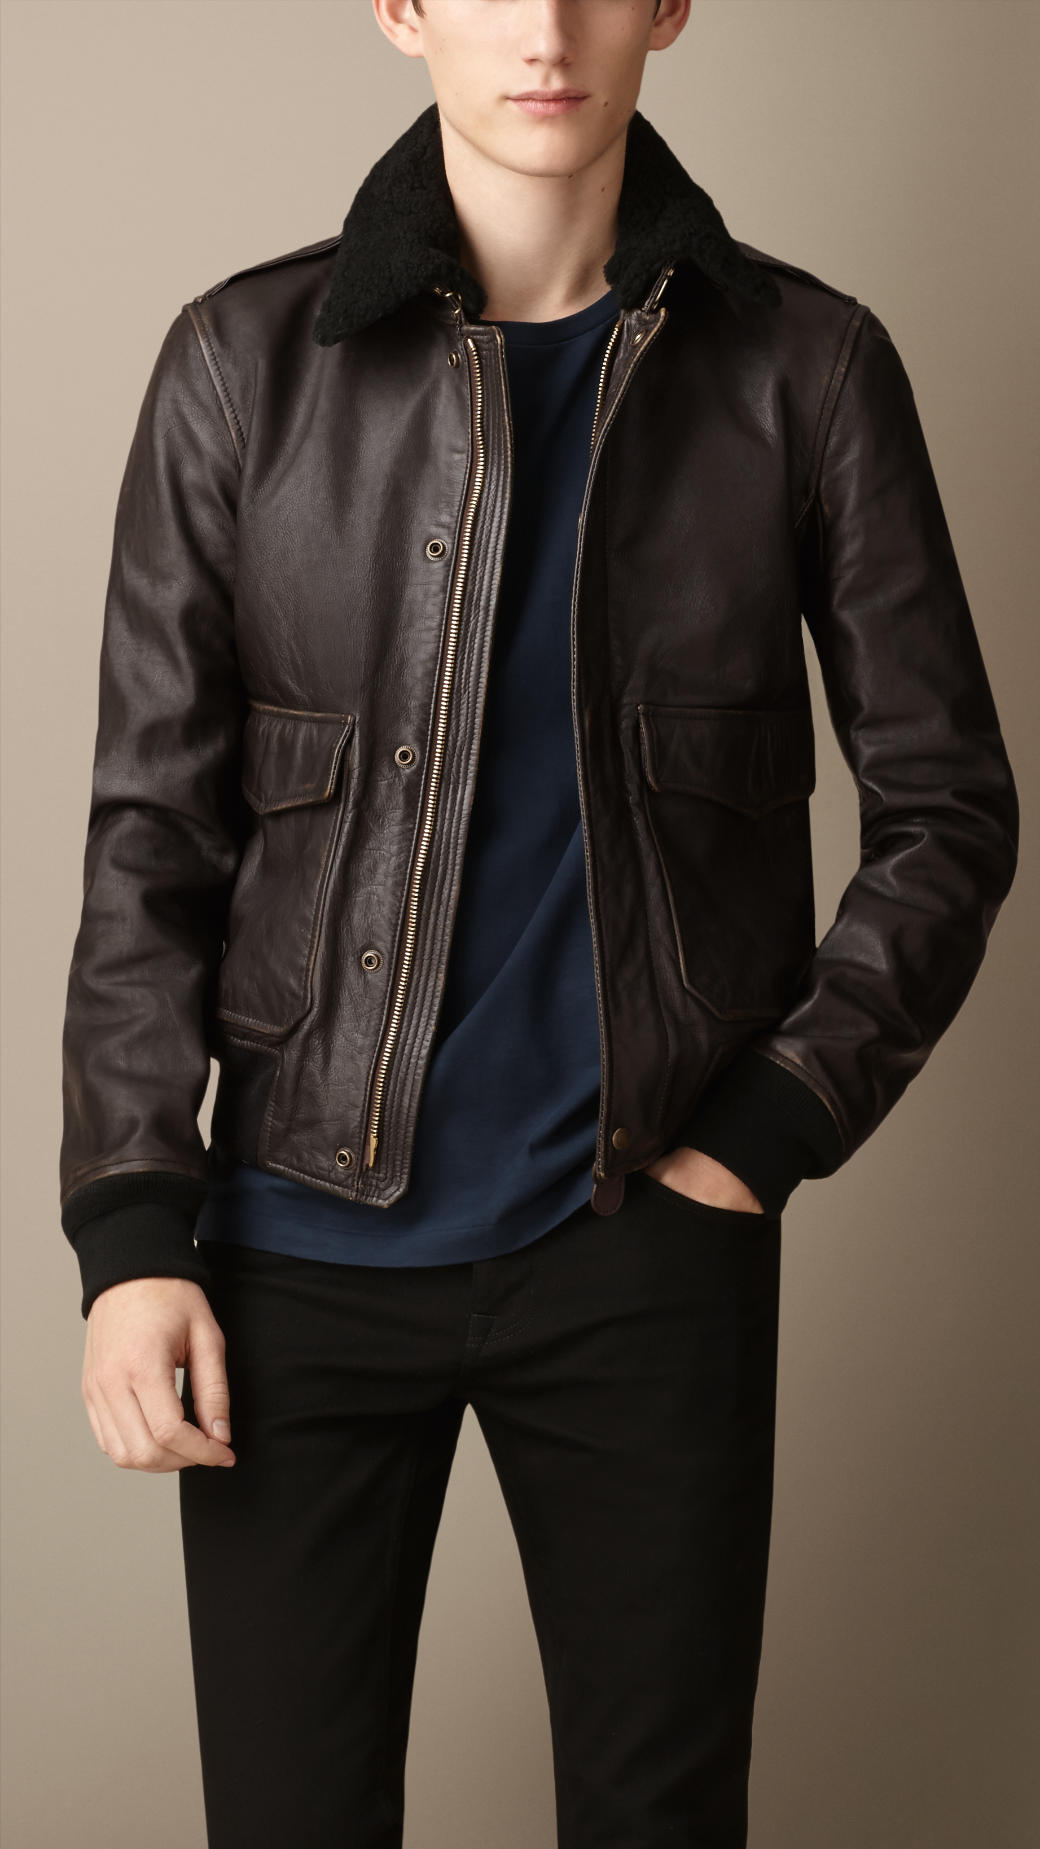 Lyst - Burberry Leather Aviator Jacket with Shearling Collar in Brown ...